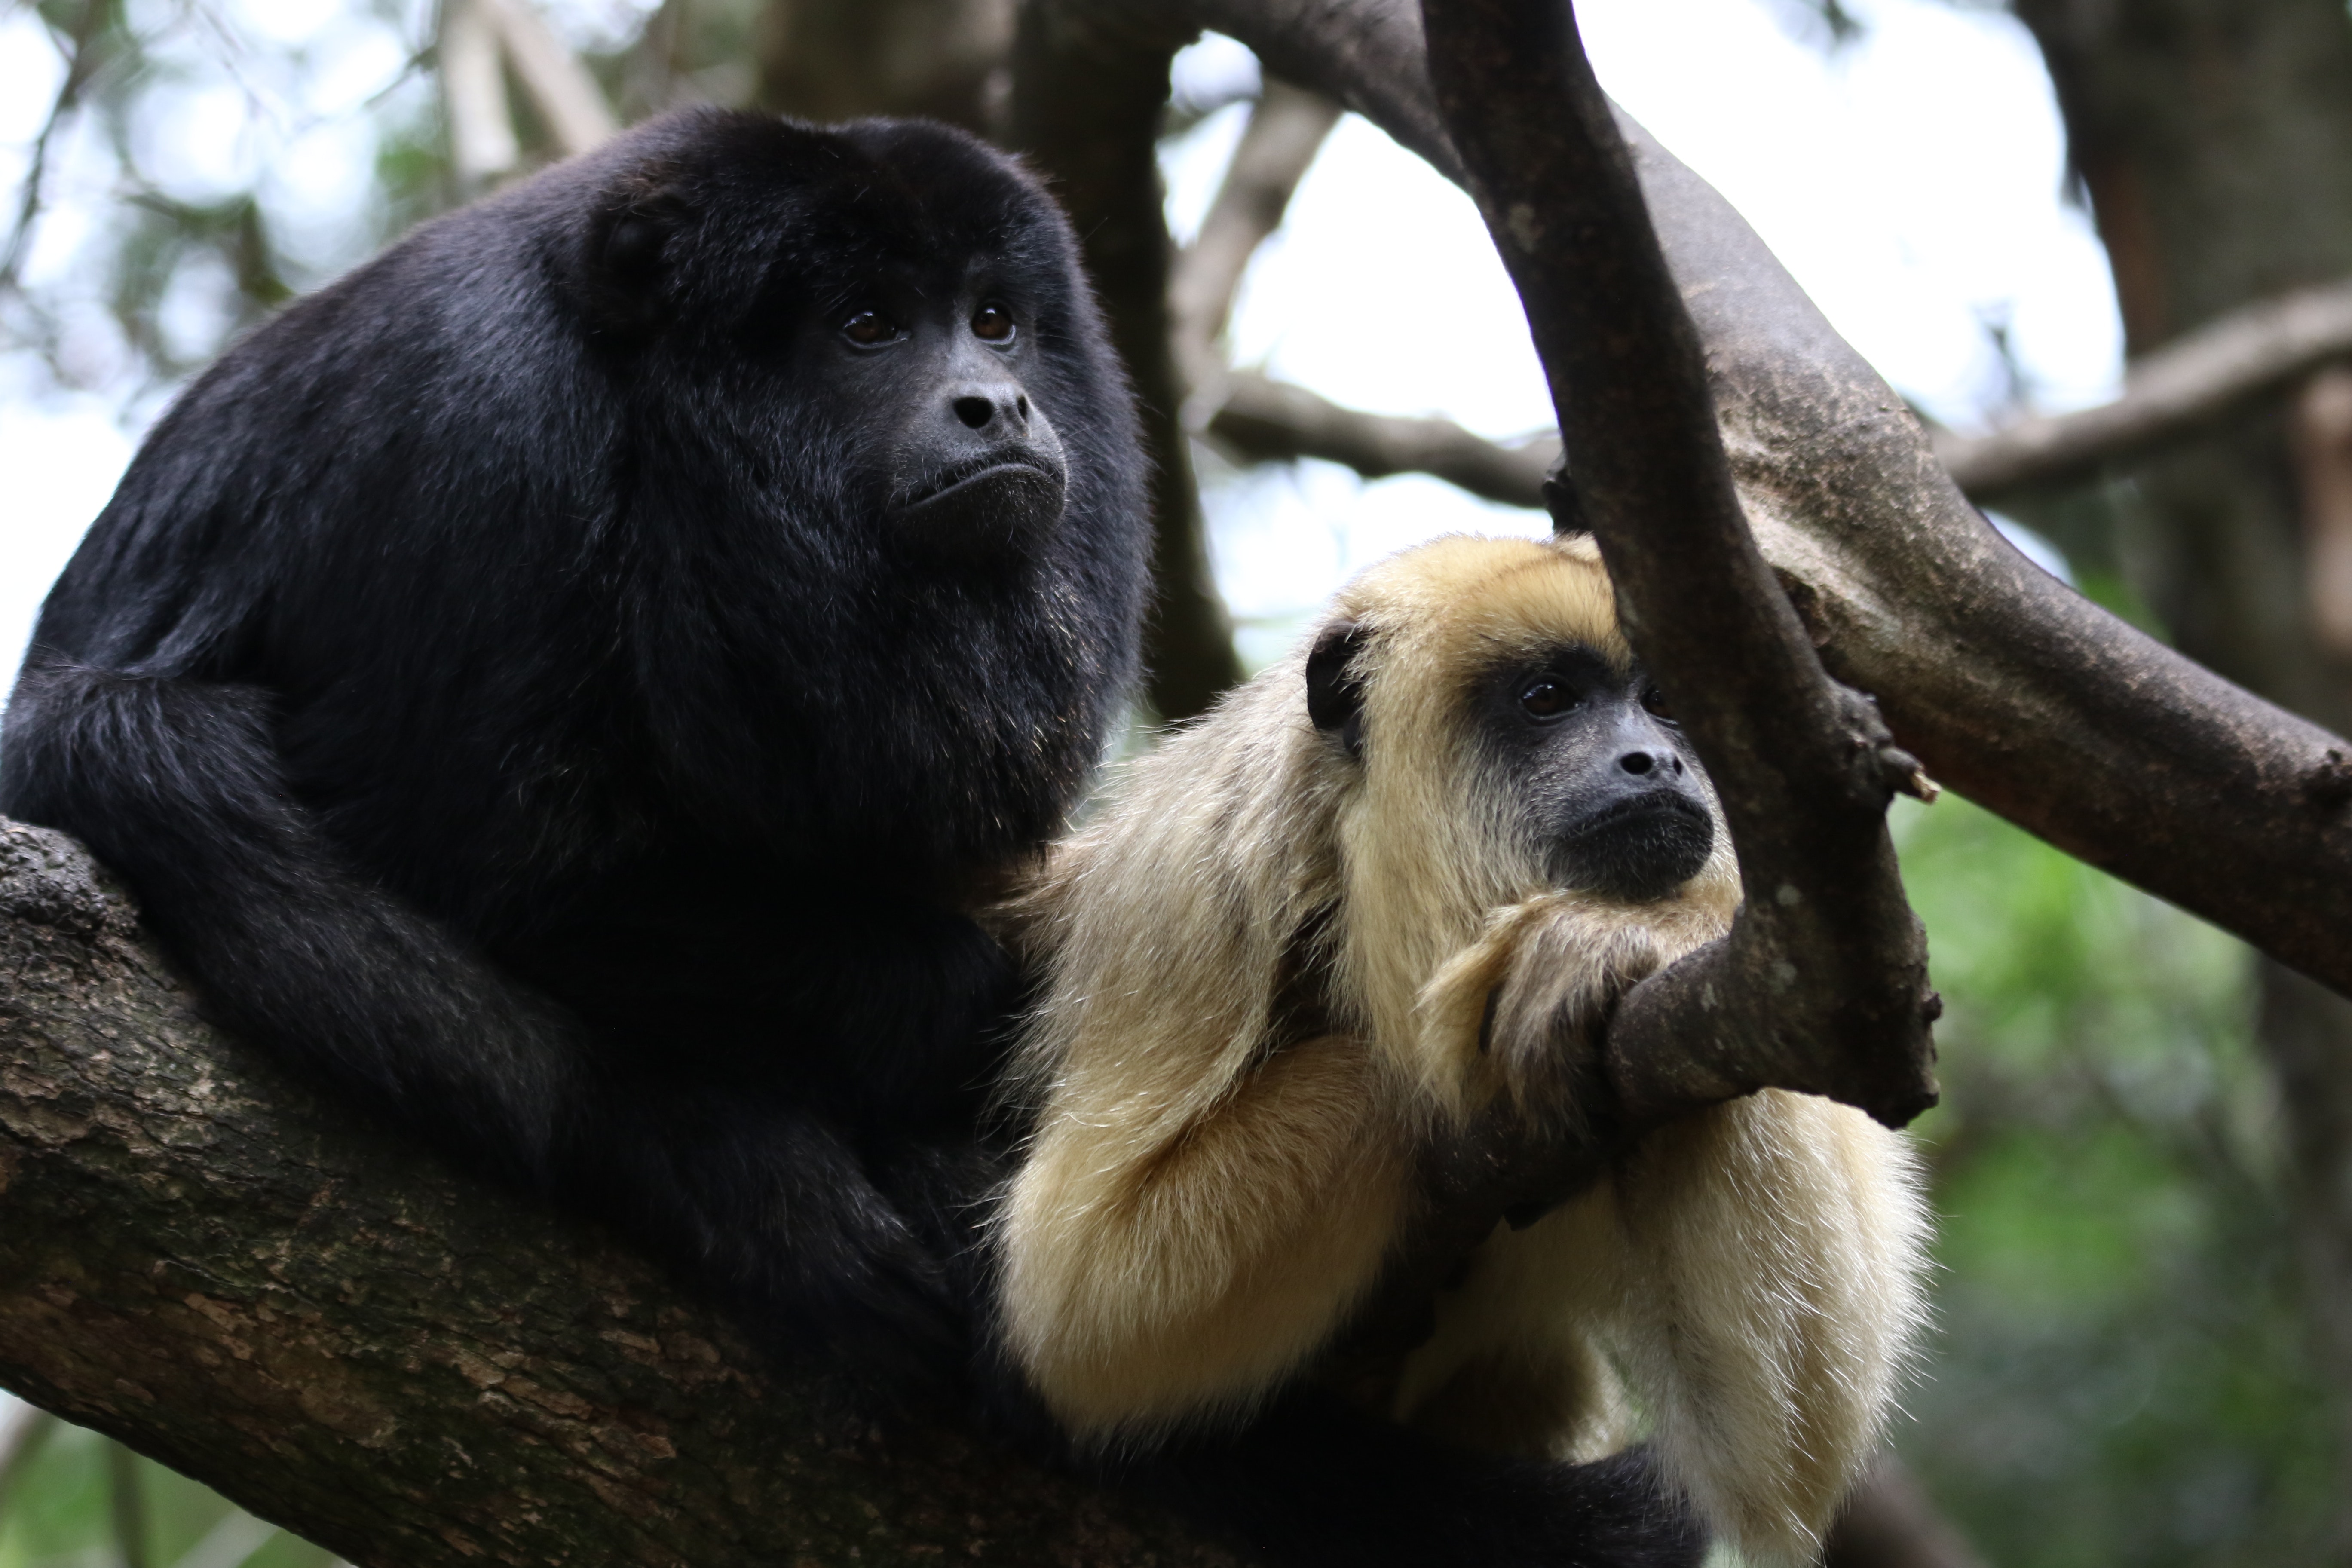 Two Brown-and-black Primates · Free Stock Photo